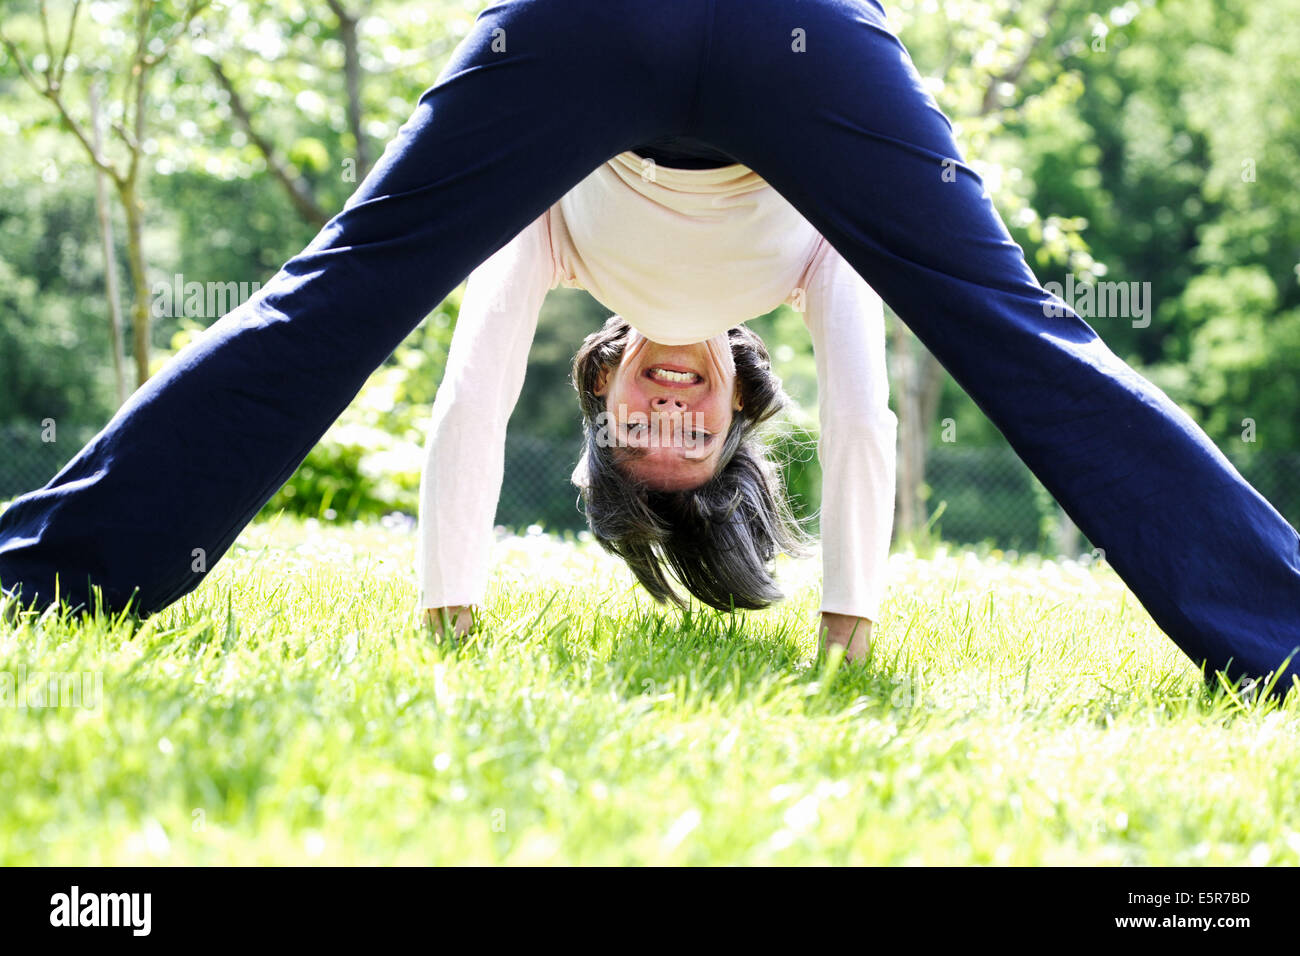 60 year old woman stretching. Stock Photo